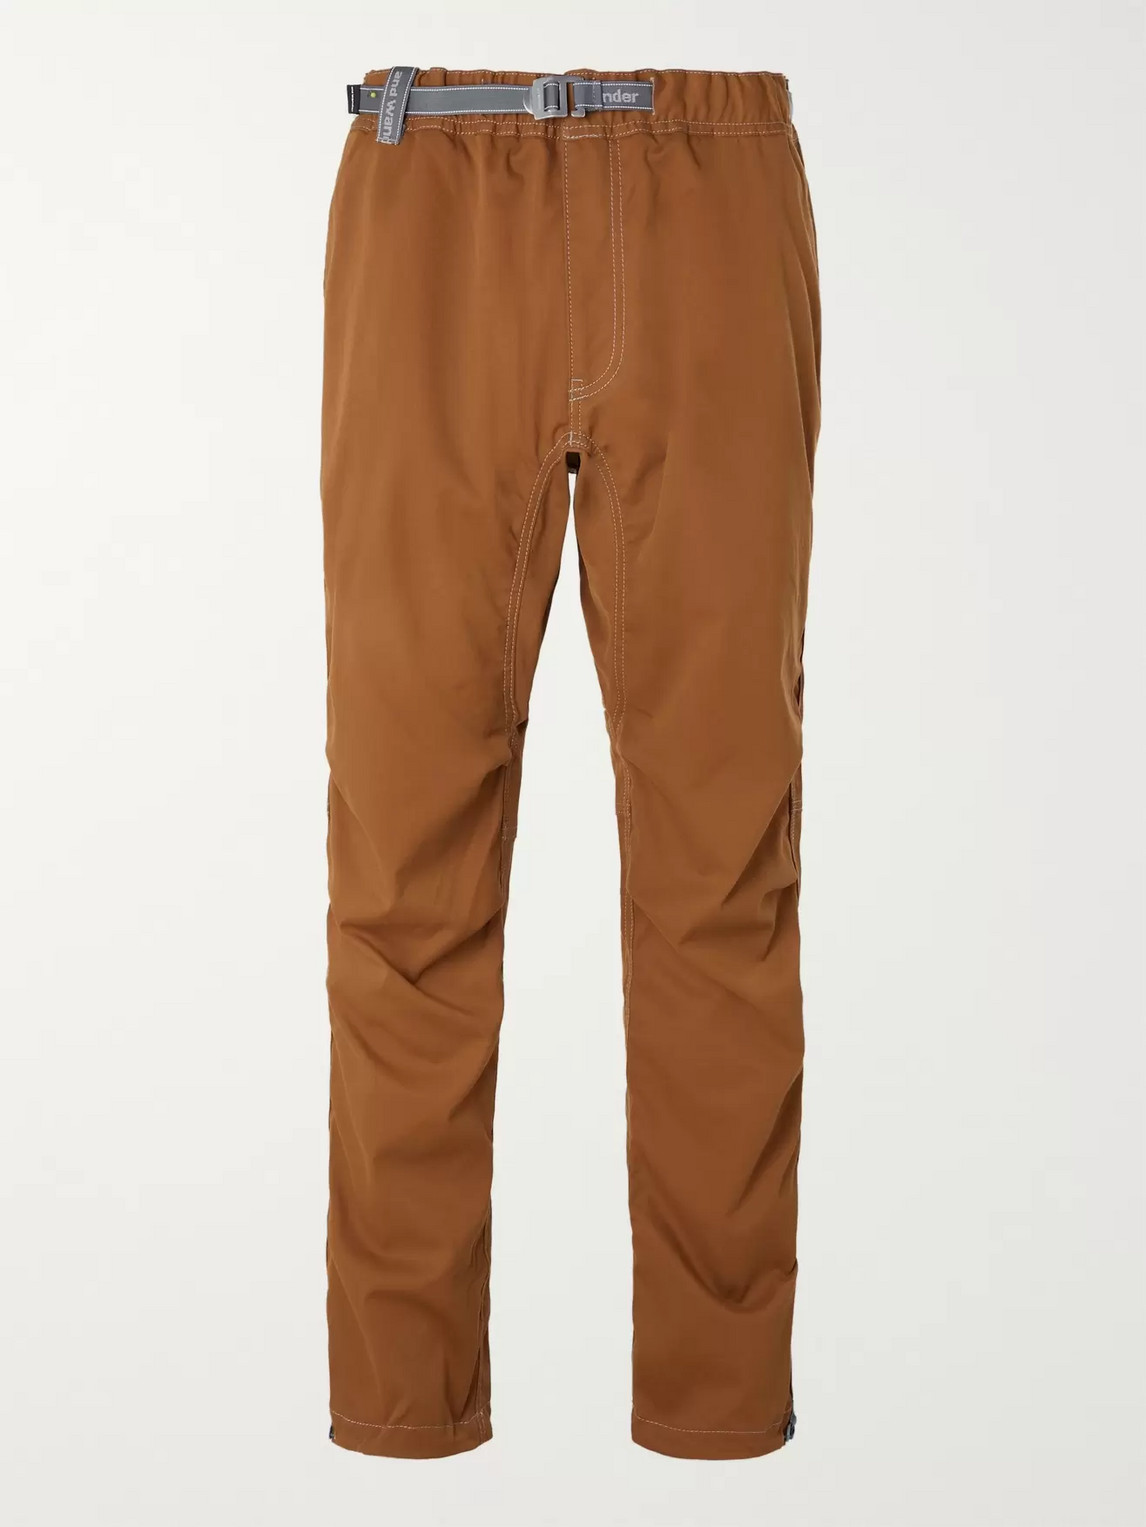 AND WANDER SHELL CLIMBING TROUSERS